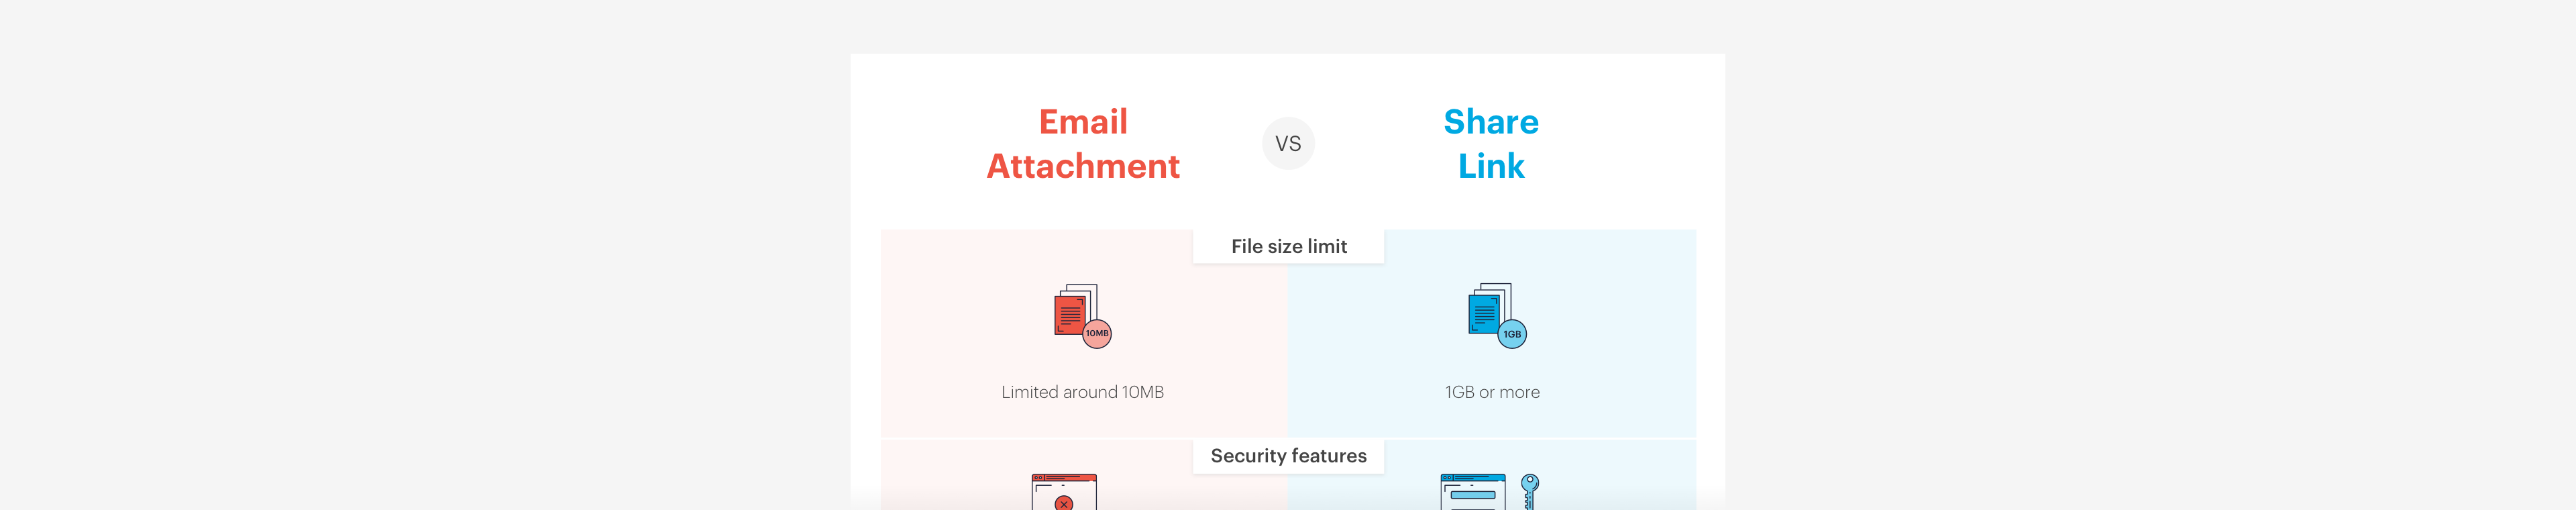 Why should you reconsider sending email attachments?